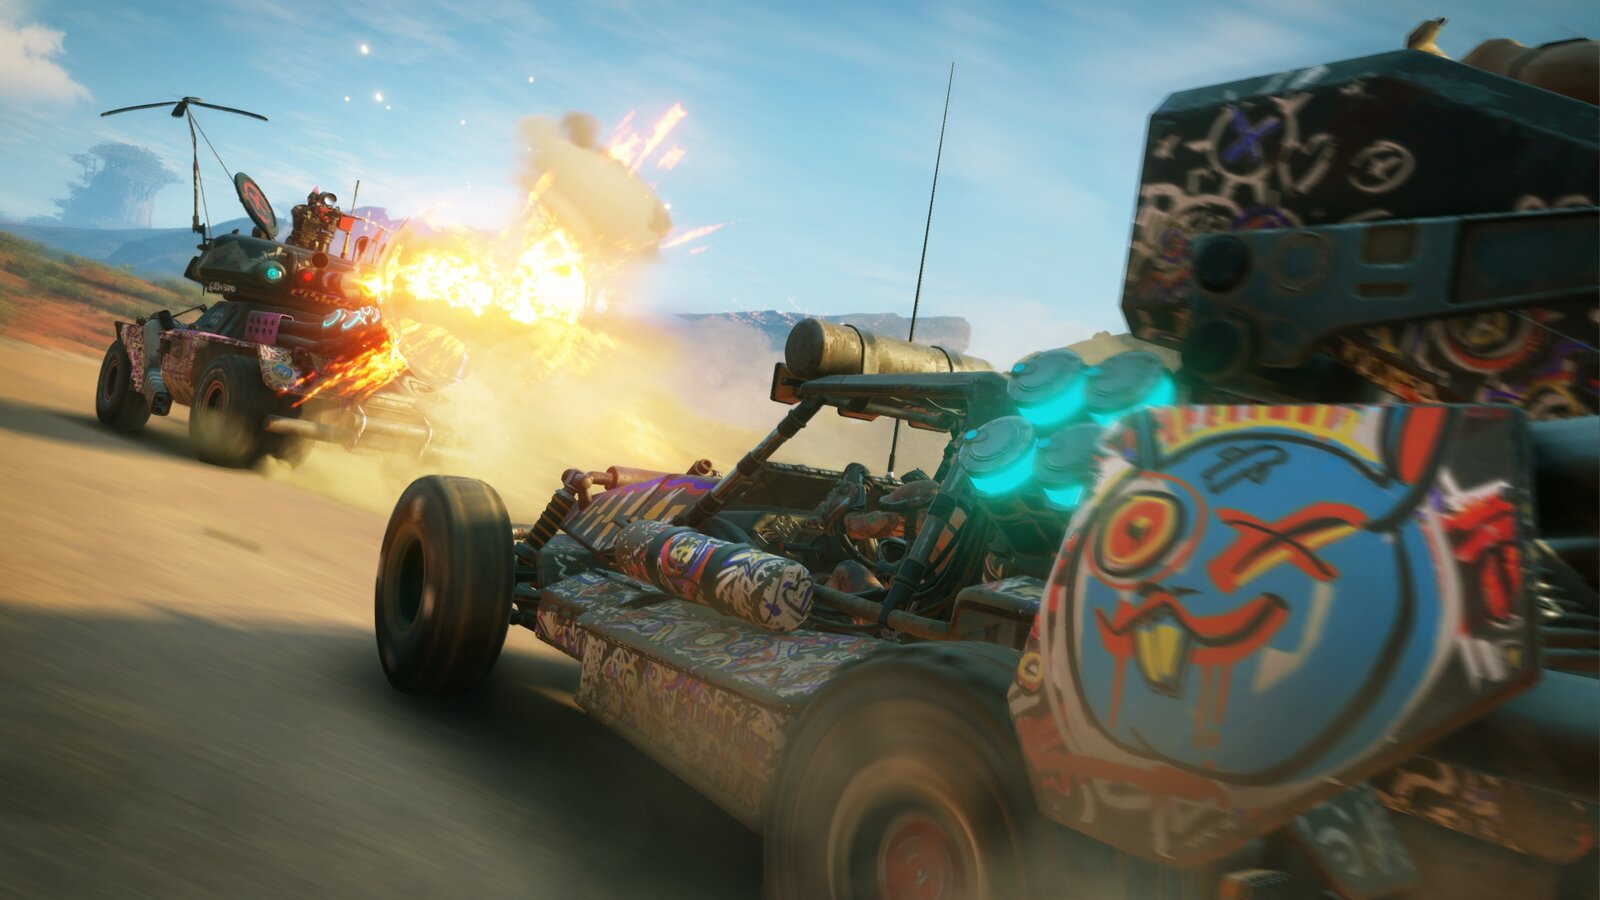 RAGE 2 - Deluxe Edition